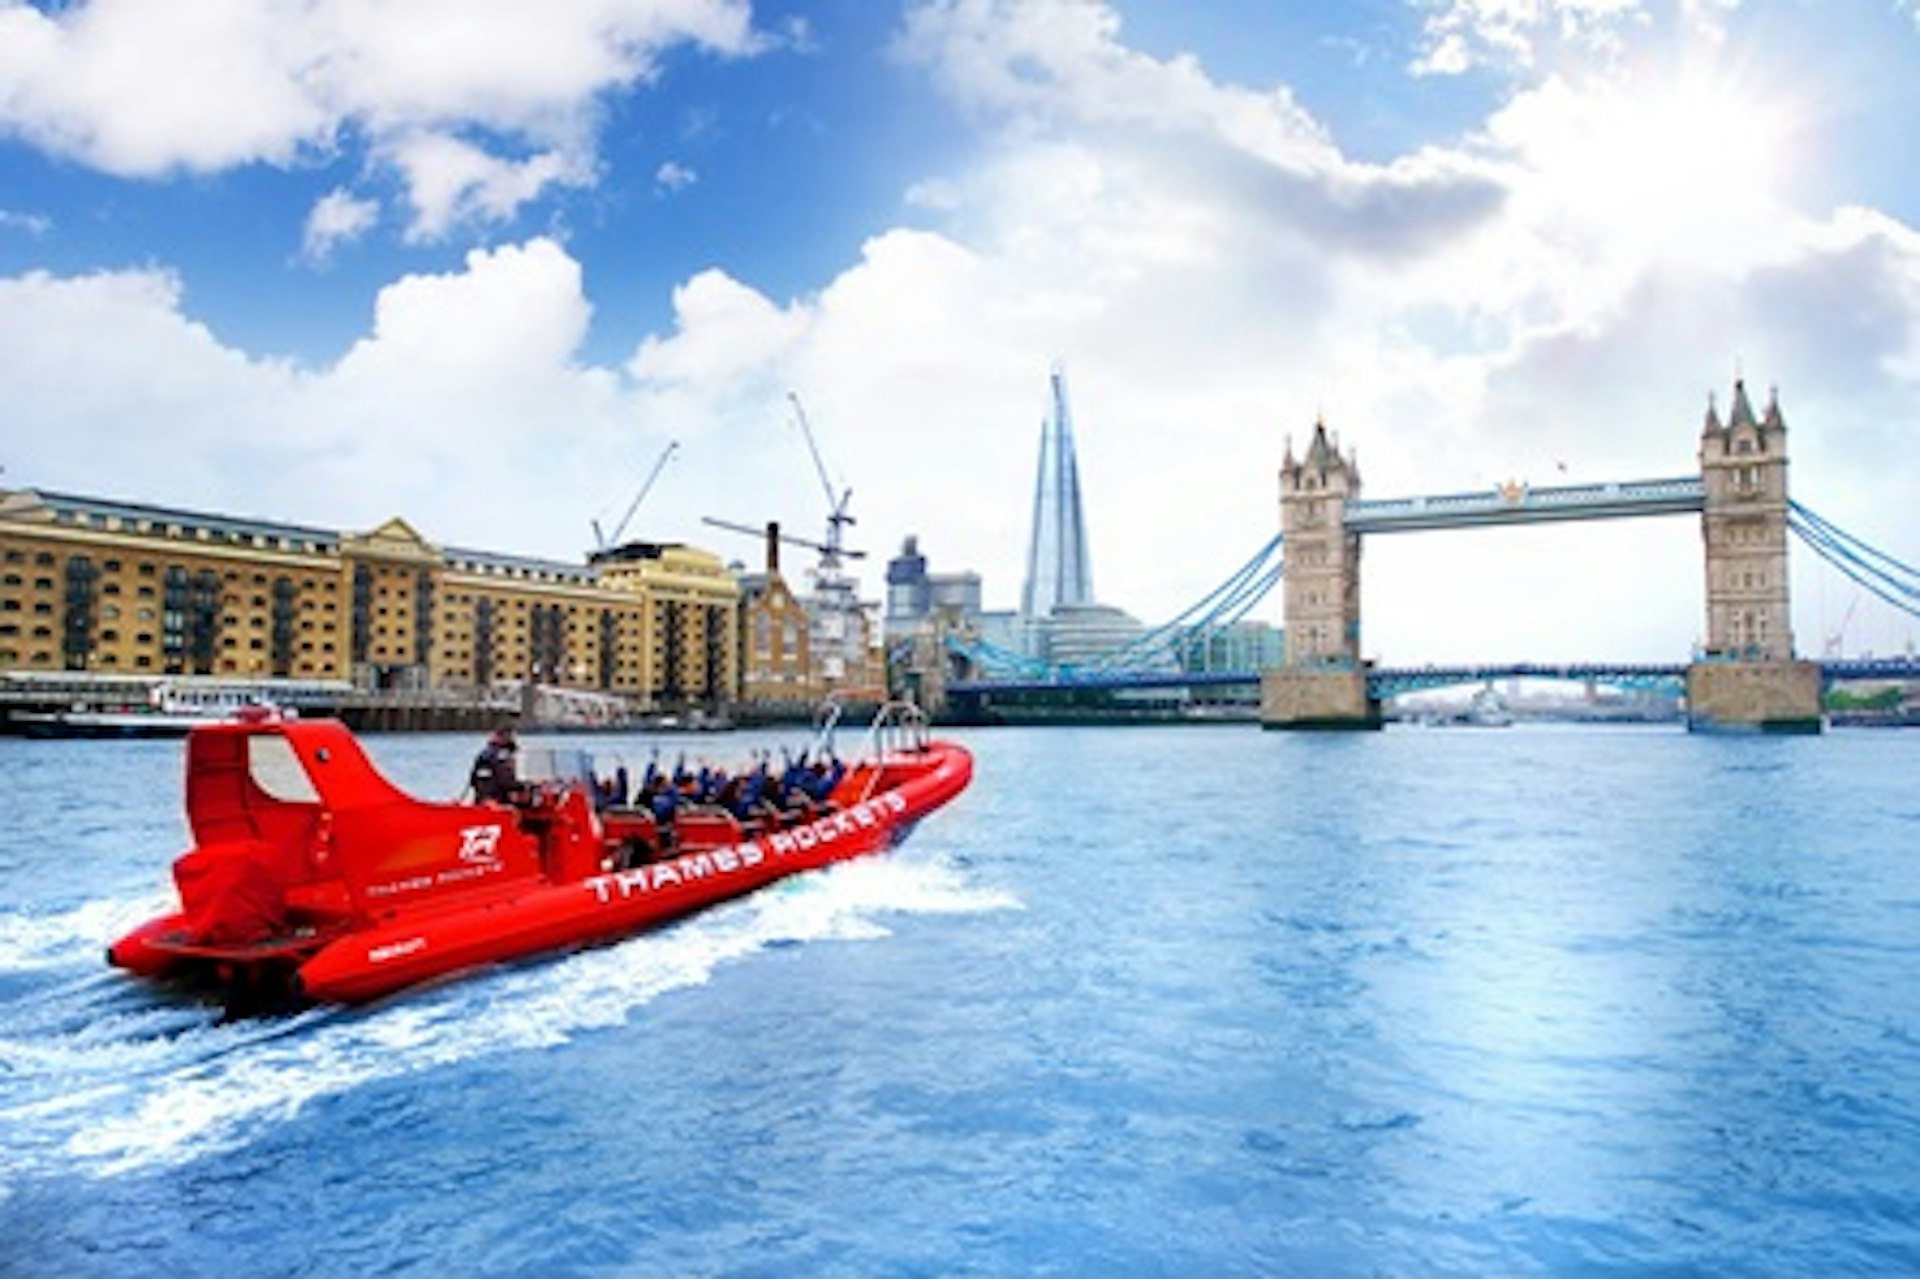 Thames Rockets Speed Boat Ride and Three Course Meal with Wine at Brasserie Blanc for Two 2